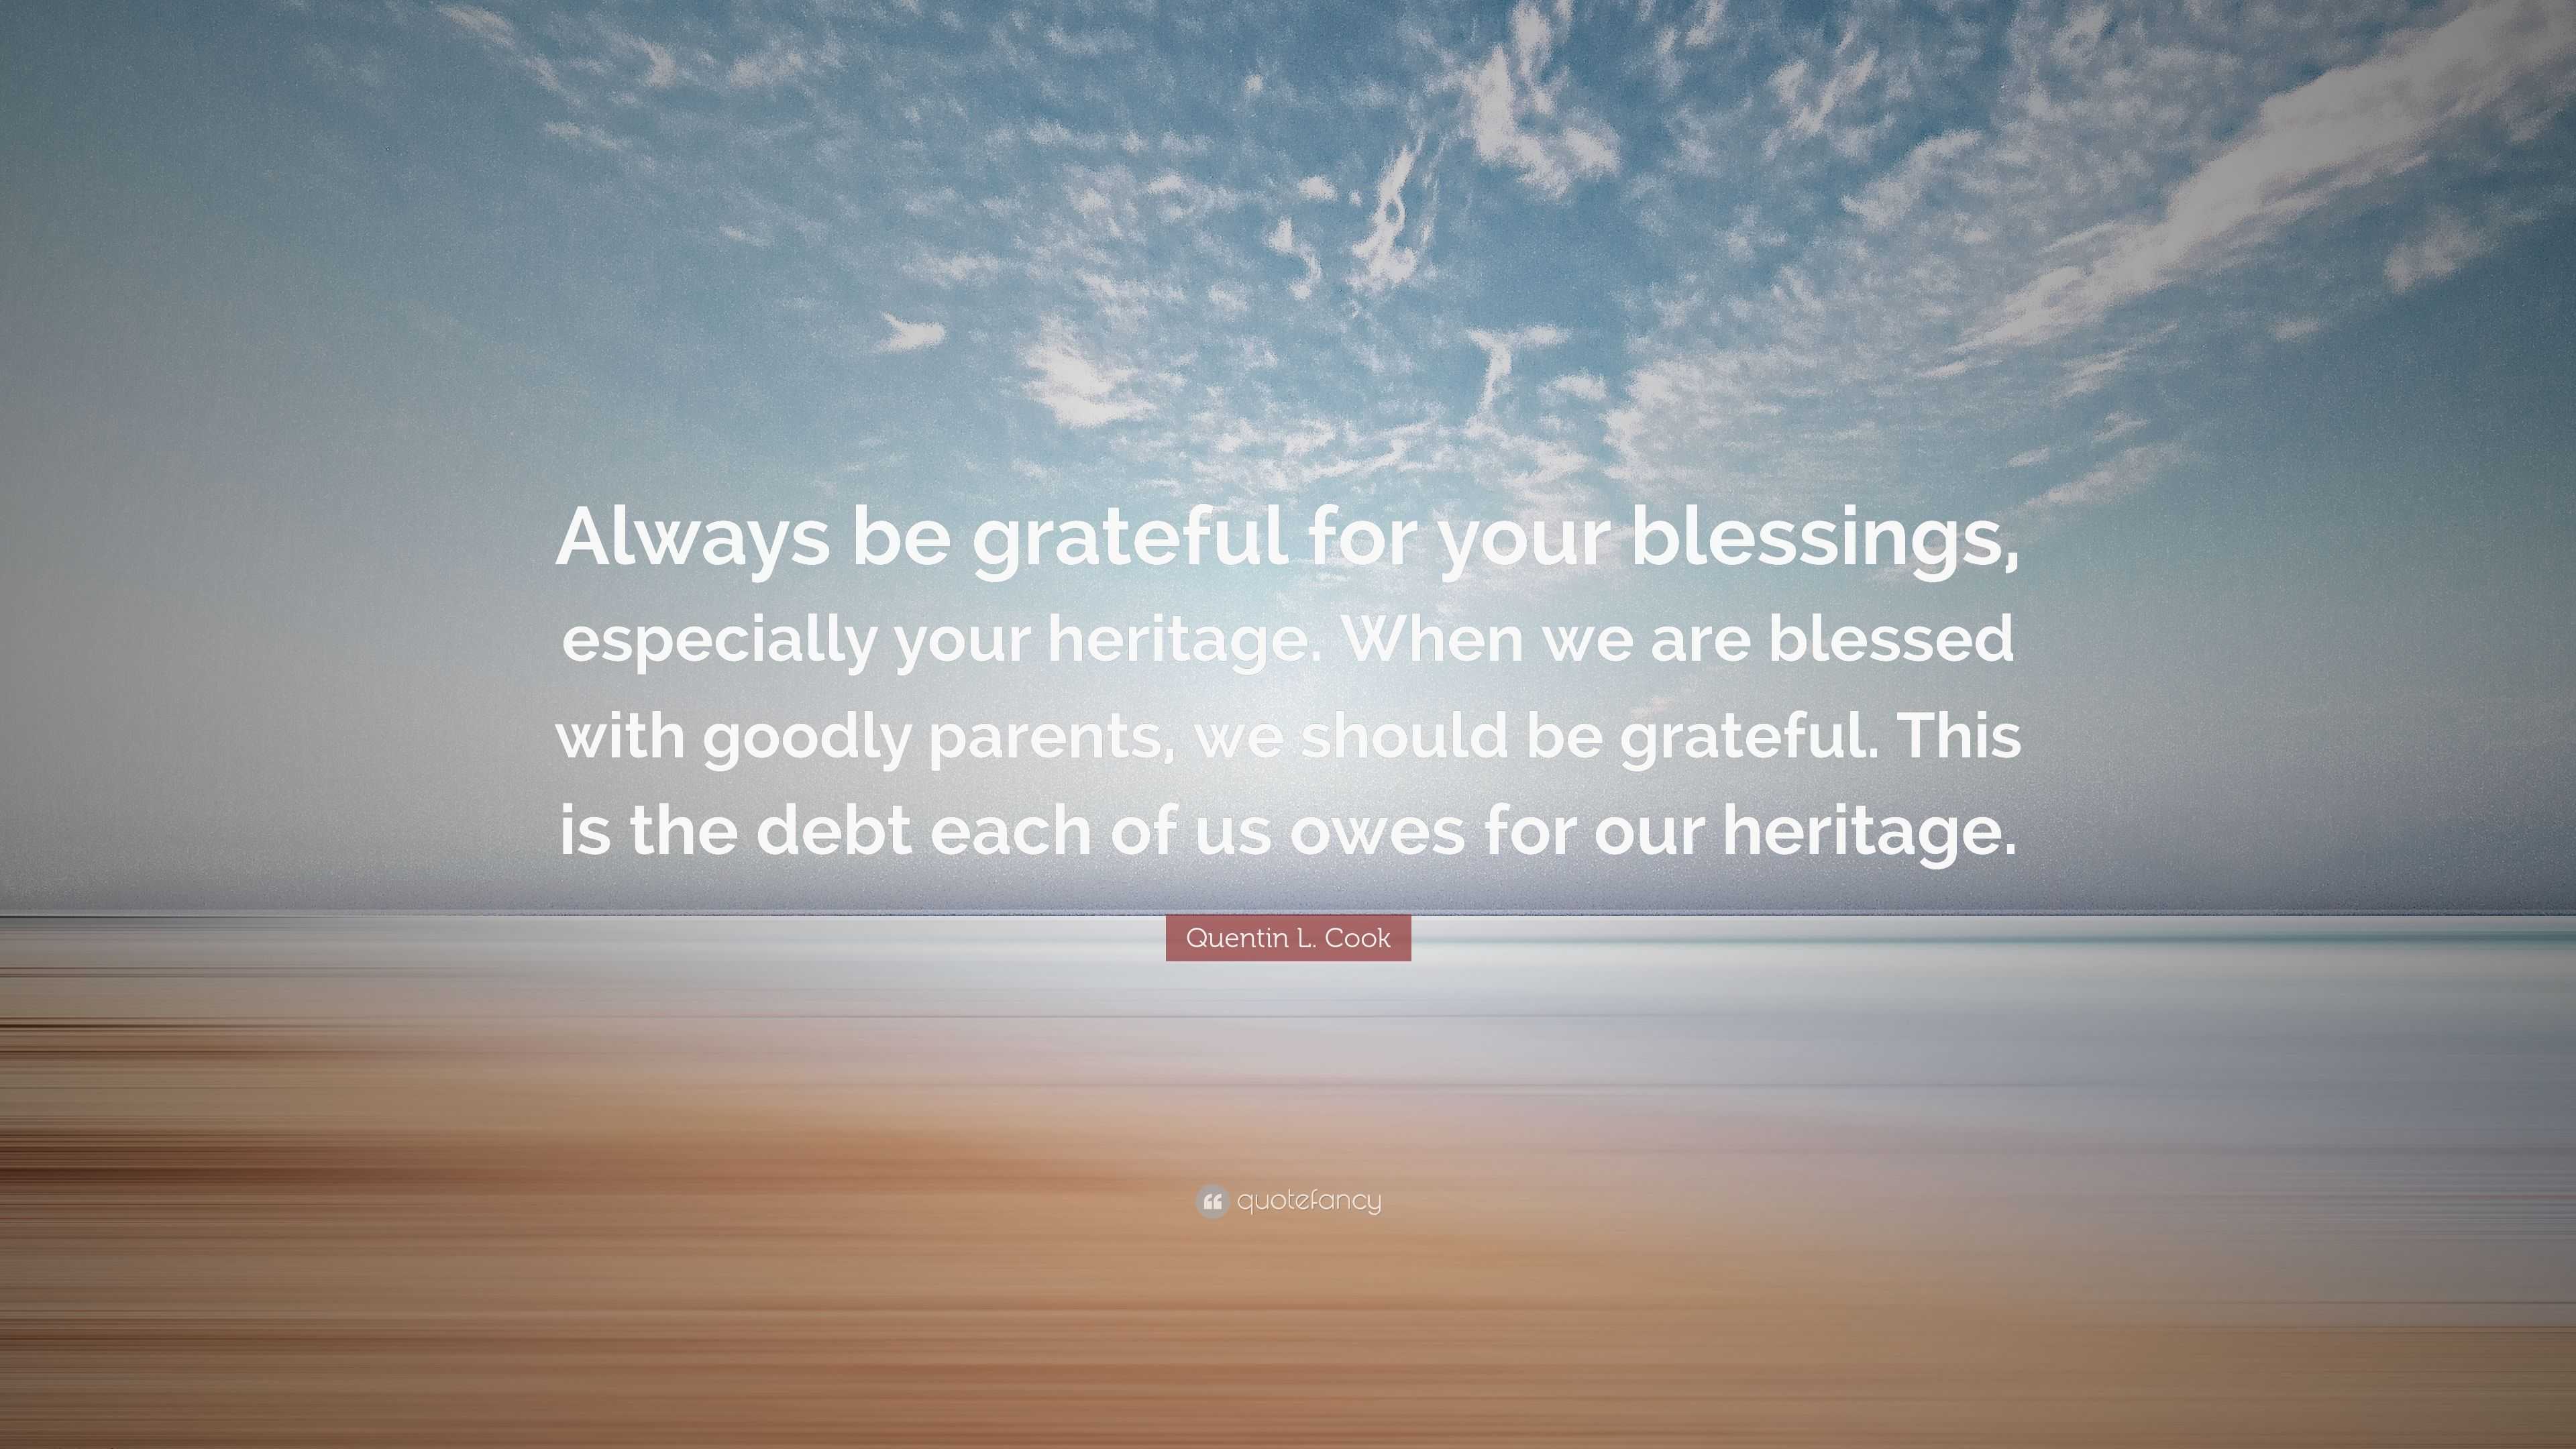 https://quotefancy.com/media/wallpaper/3840x2160/3747602-Quentin-L-Cook-Quote-Always-be-grateful-for-your-blessings.jpg